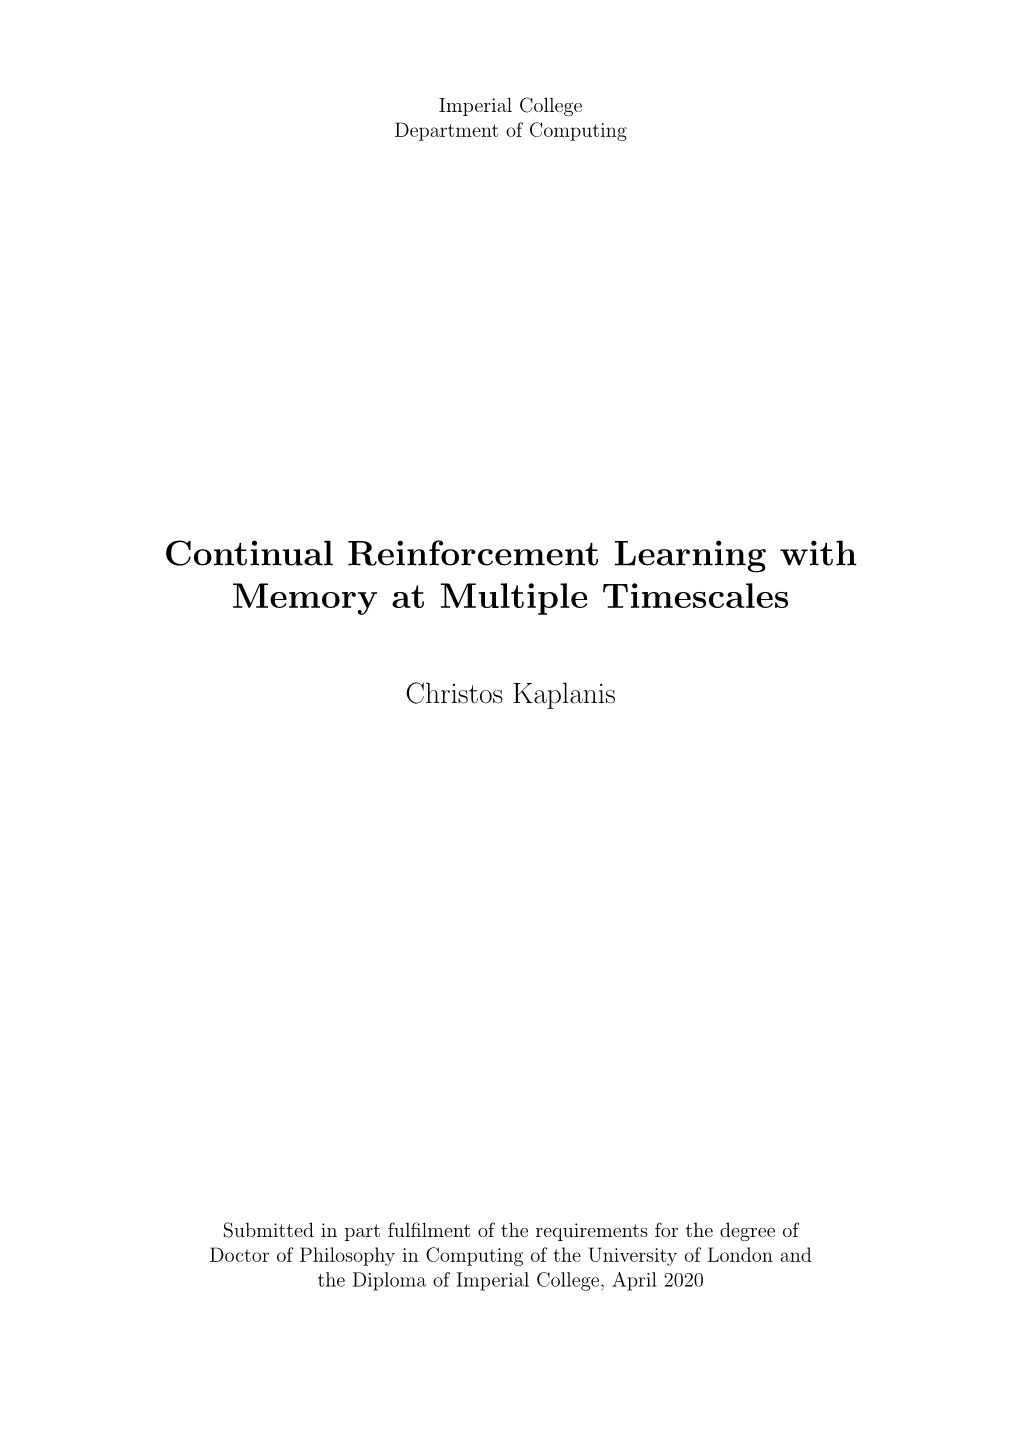 Continual Reinforcement Learning with Memory at Multiple Timescales